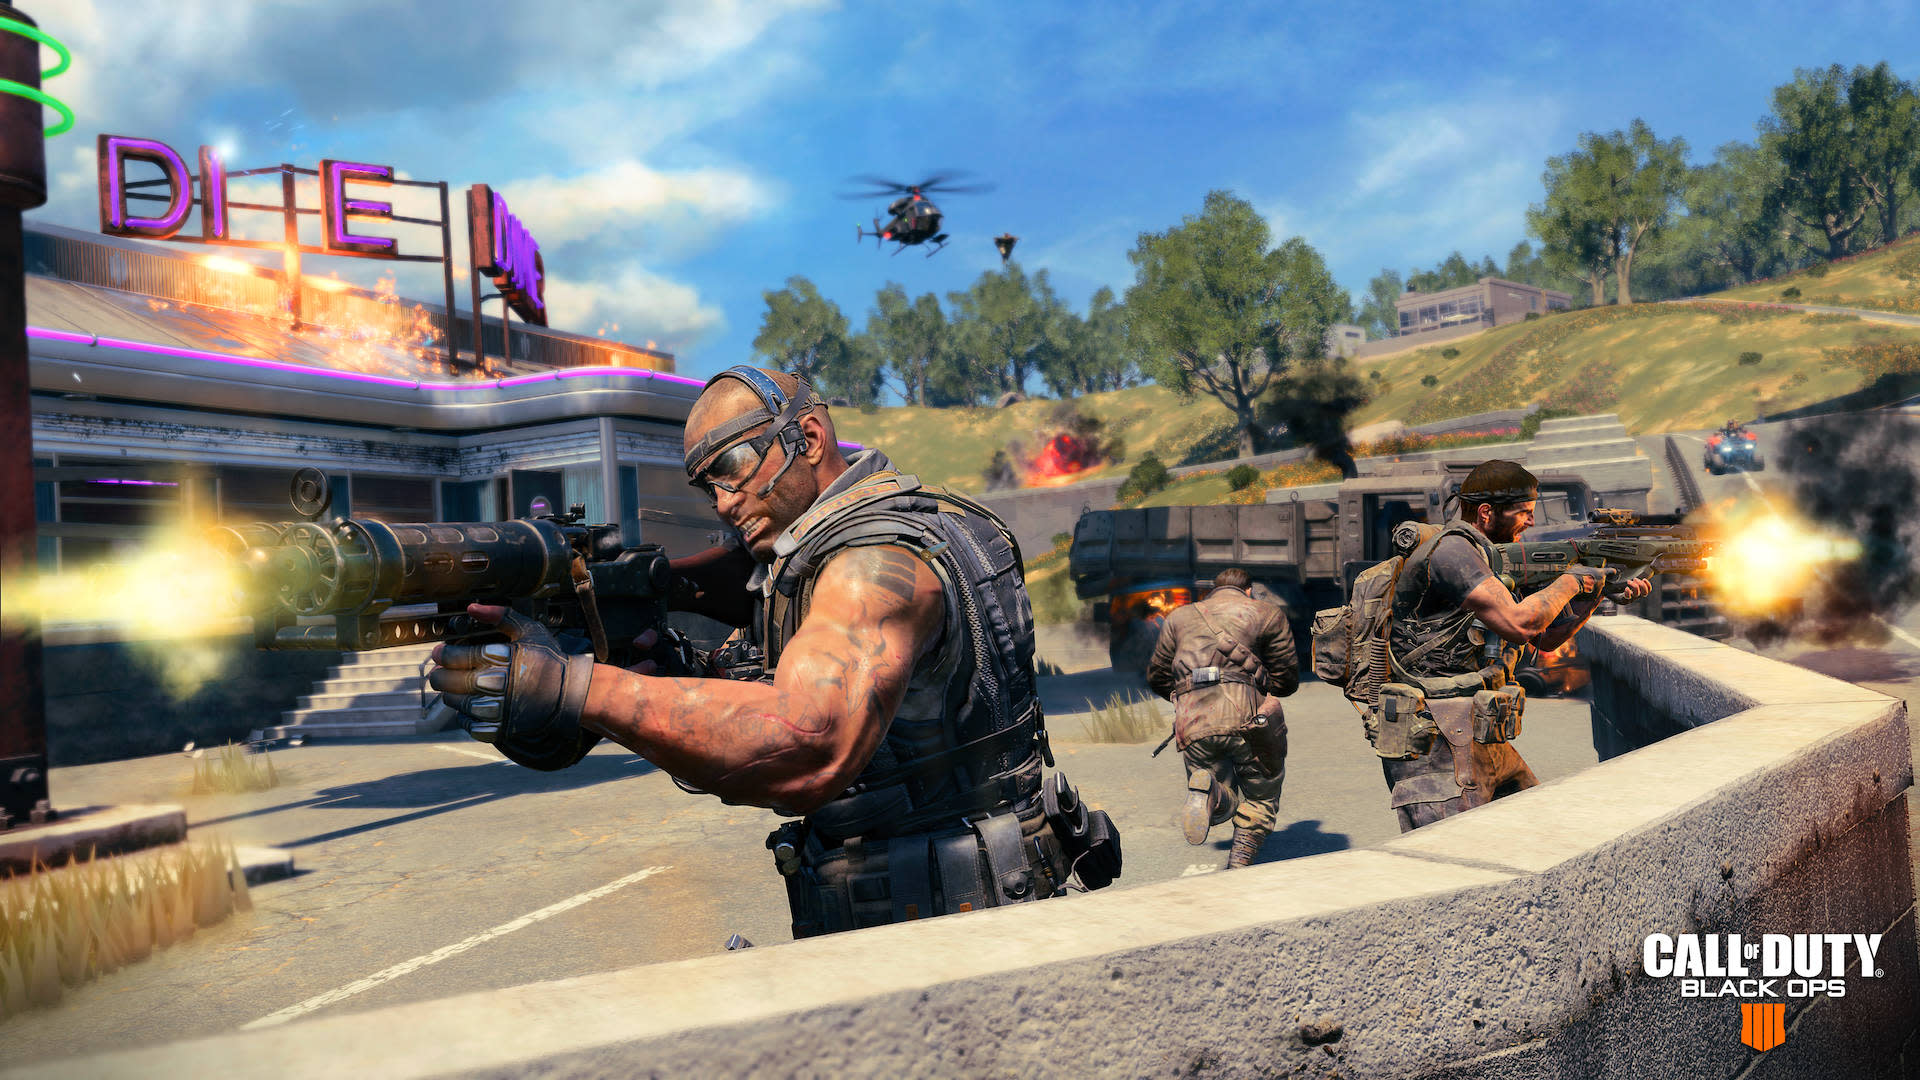 Watch A Twitch Stream To Unlock Black Ops 4 Battle Royale Pc